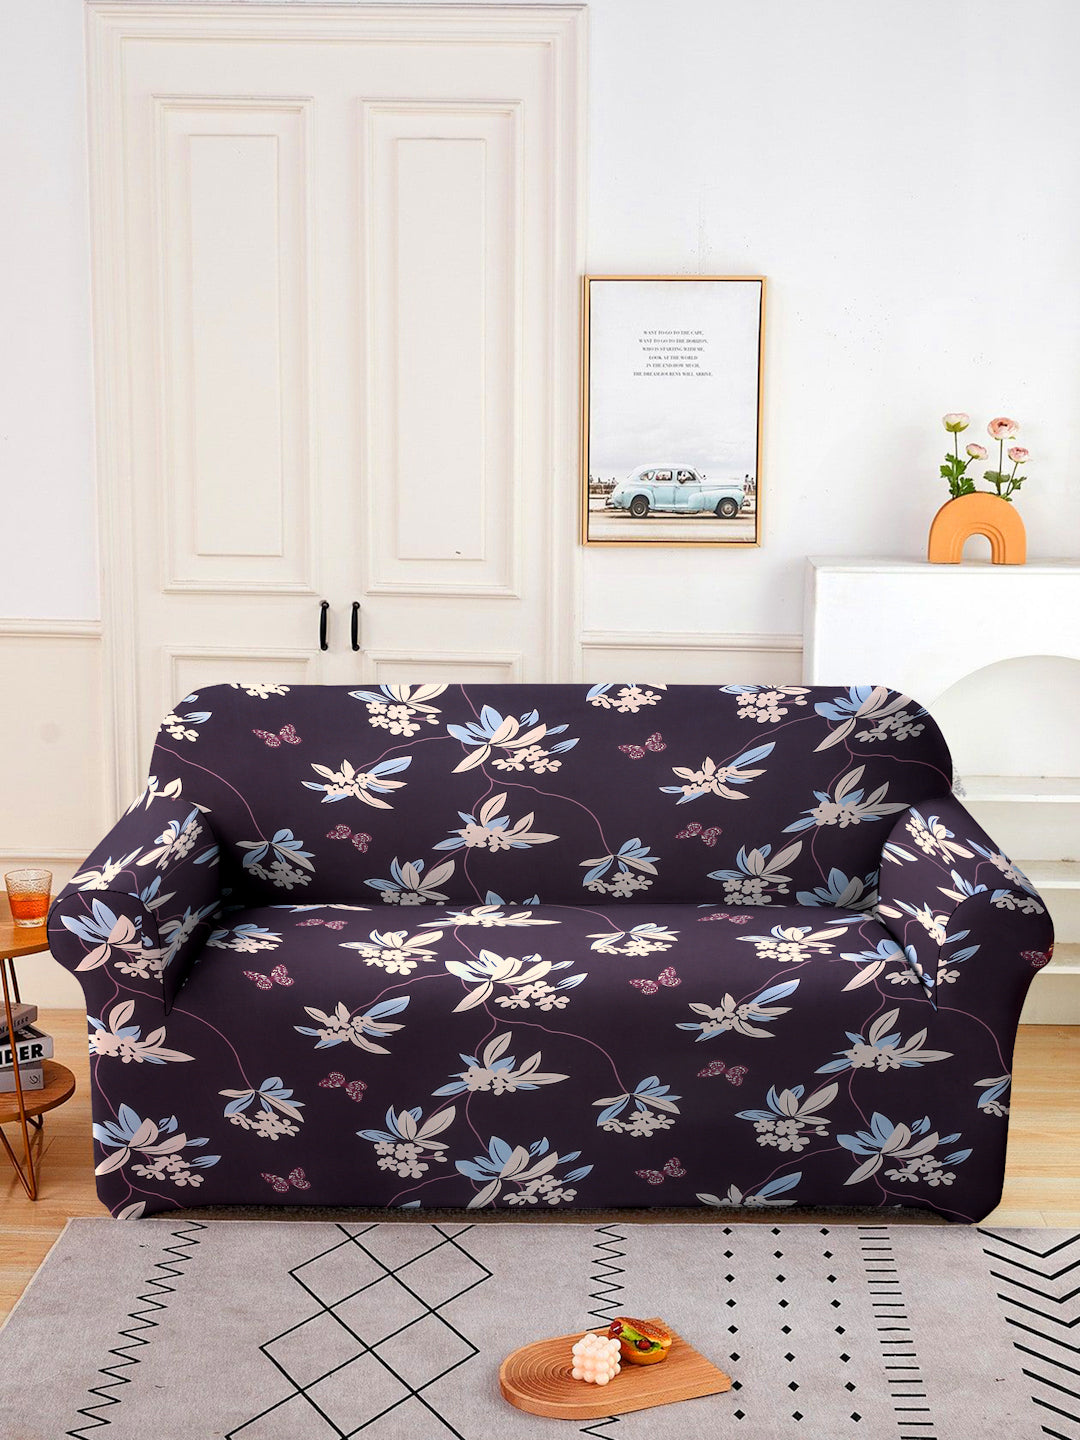 Elastic Stretchable Universal Printed Sofa Cover 4 Seater- Purple